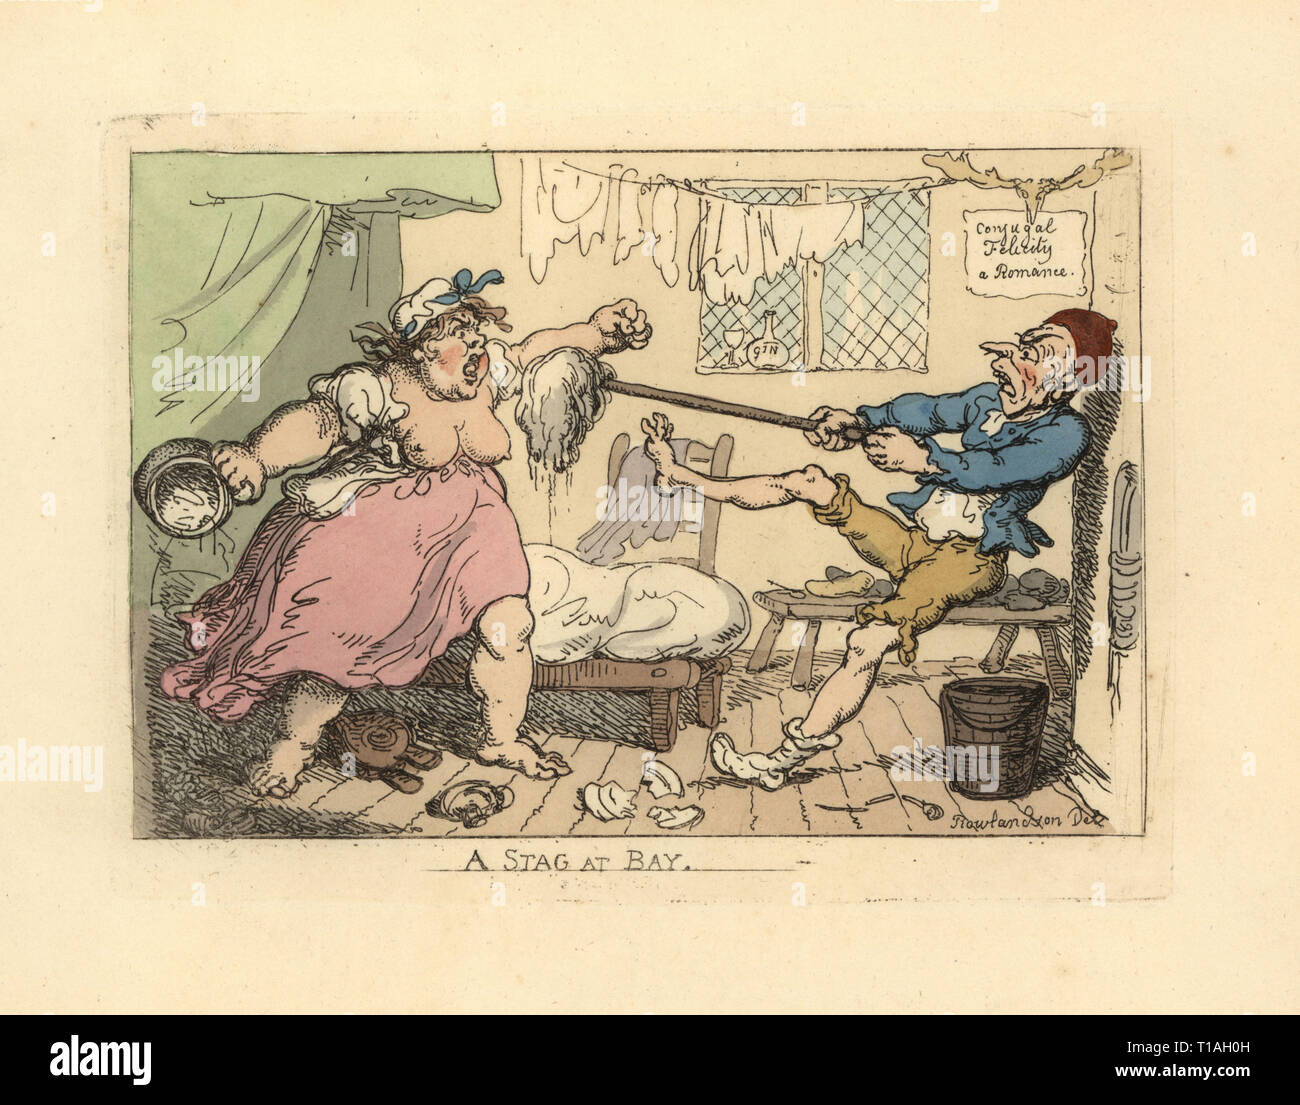 Husband holding off his angry wife with mop. A bottle of gin on the windowsill and a sign reading Conjugal Felicity a Romance. A Stag at Bay. Handcoloured copperplate engraving designed and etched by Thomas Rowlandson to accompany Reverend James Beresford’s Miseries of Human Life, Ackermann, 1808. Stock Photo